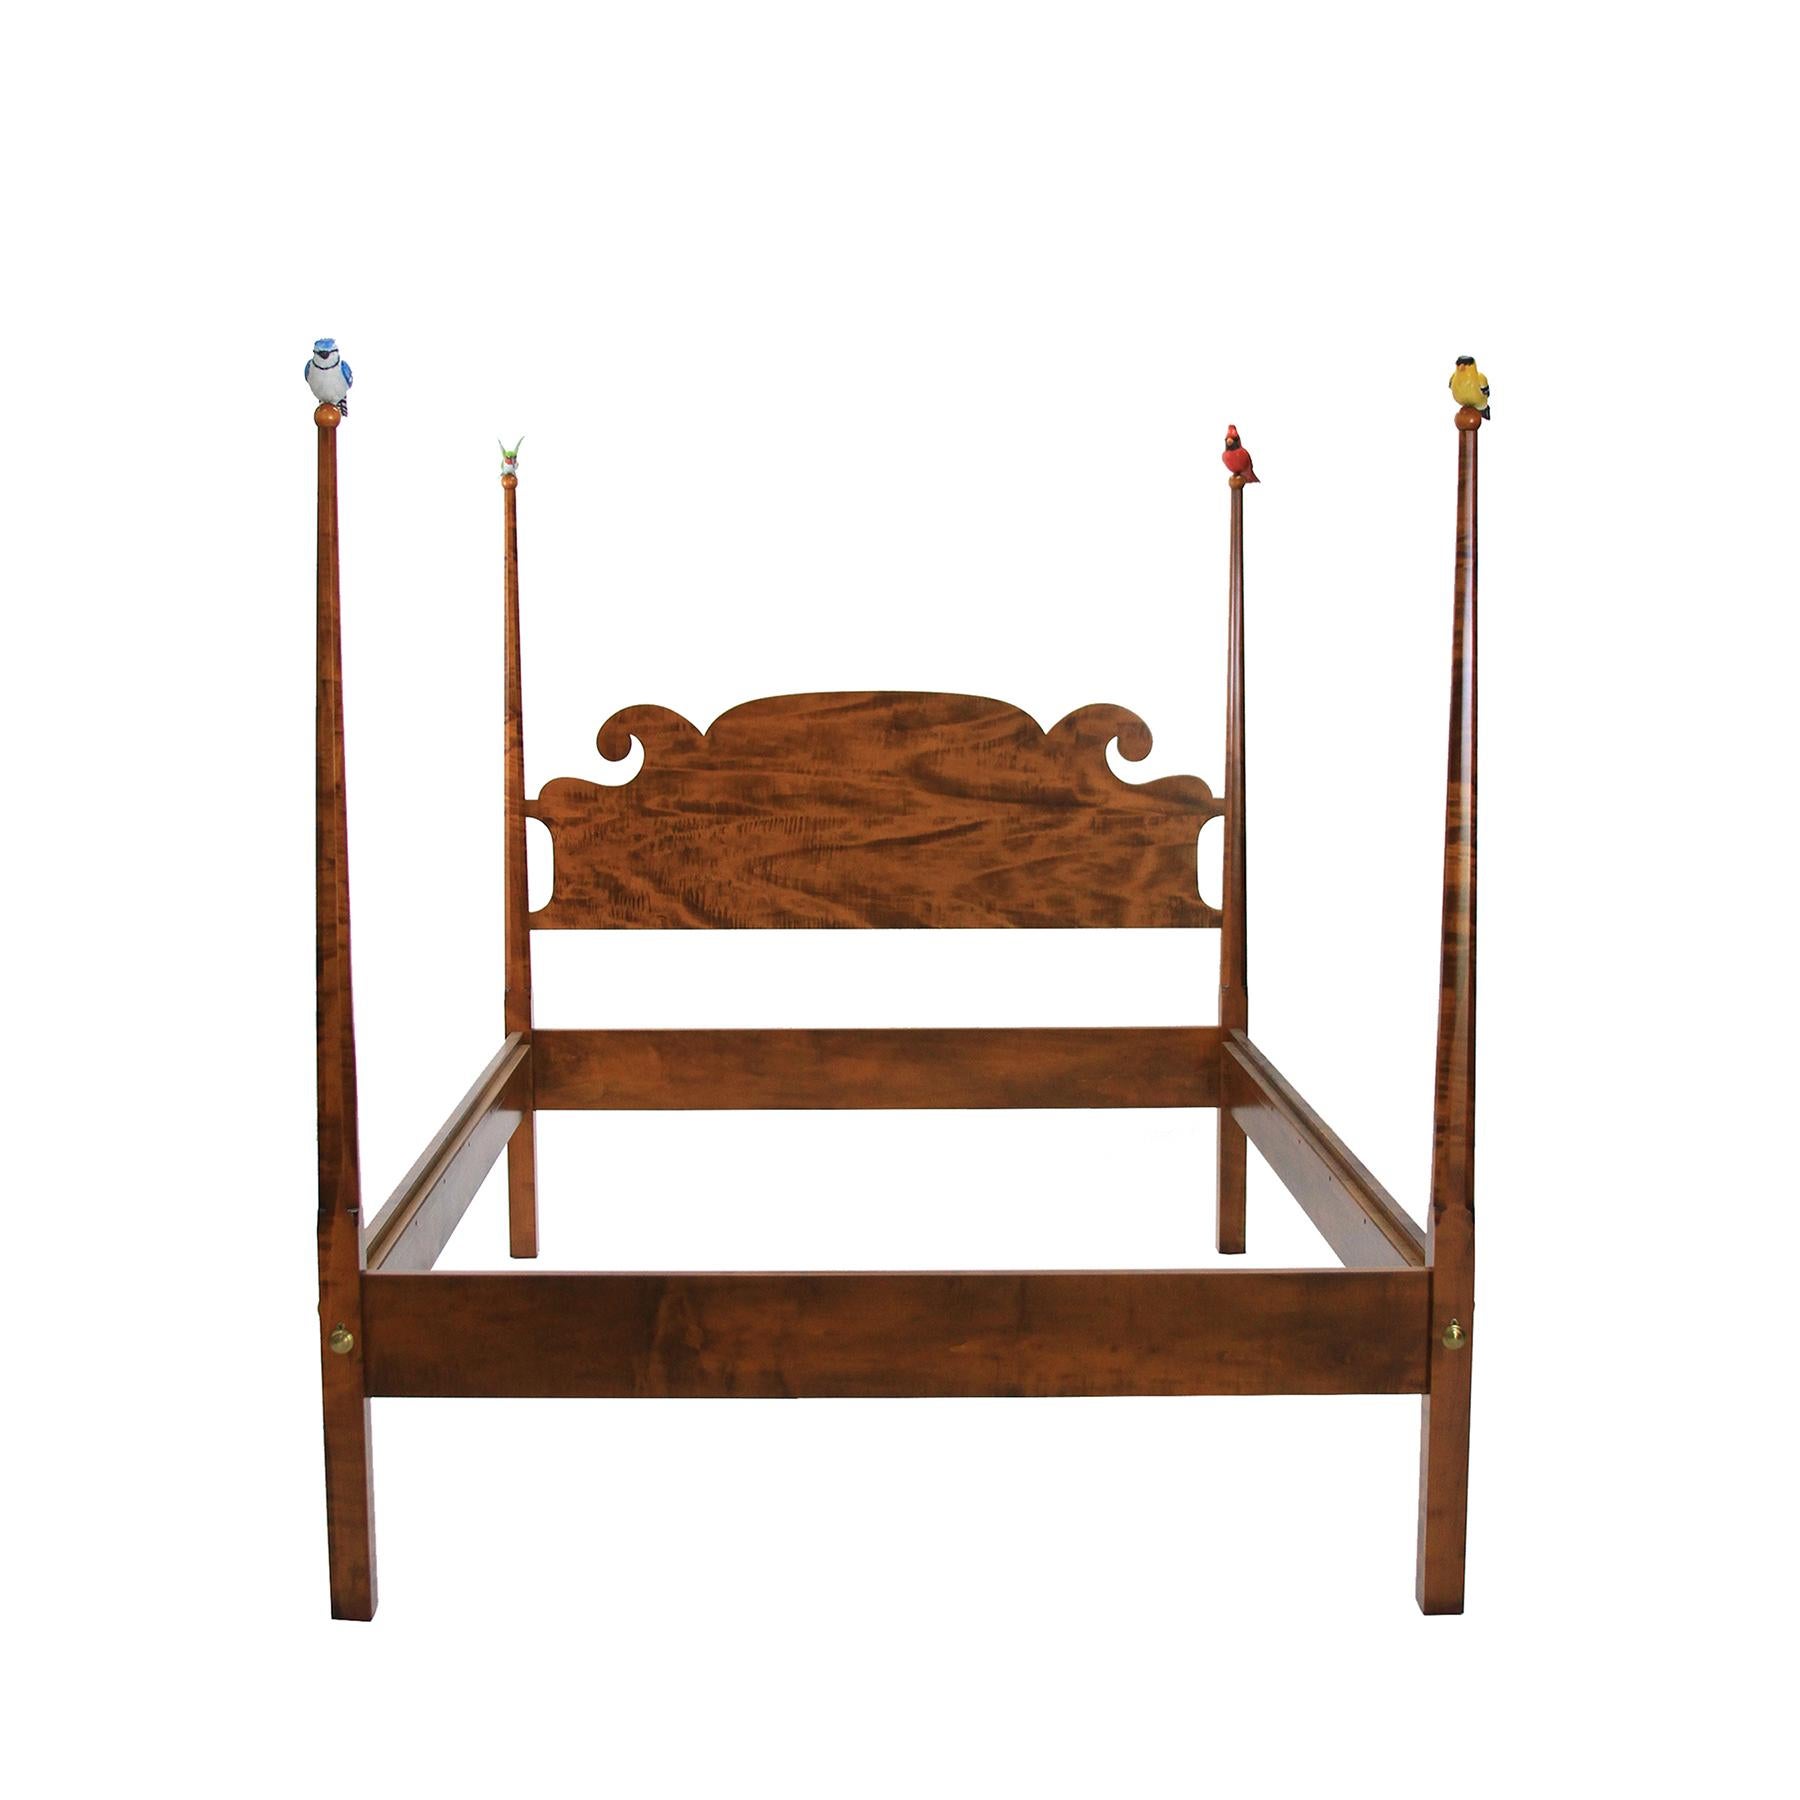 Antique White Maple Pencil Post Bed with Hand Carved Folk Art Bird Finials In New Condition For Sale In Tiverton, RI